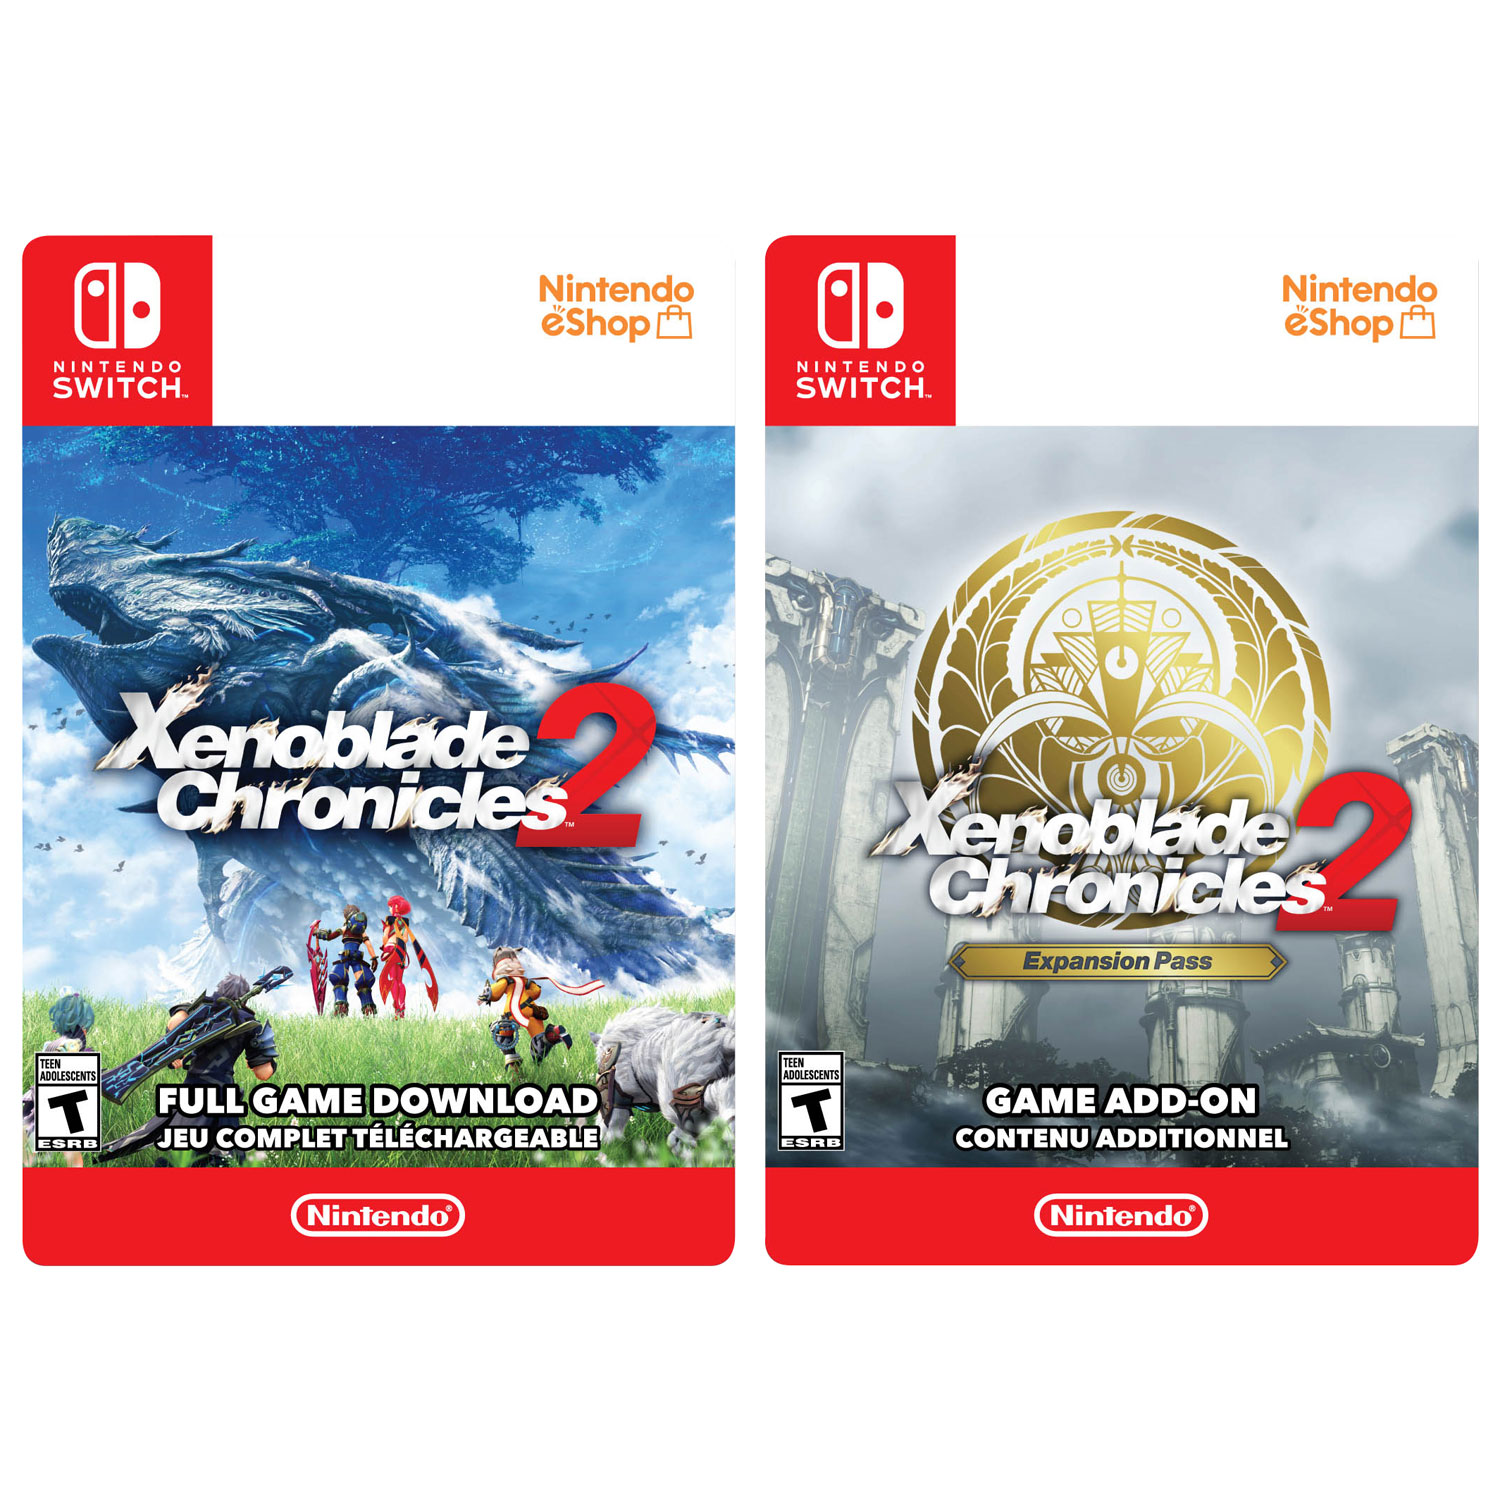 Xenoblade Chronicles 2 and Expansion Pass Bundle (Switch) - Digital Download